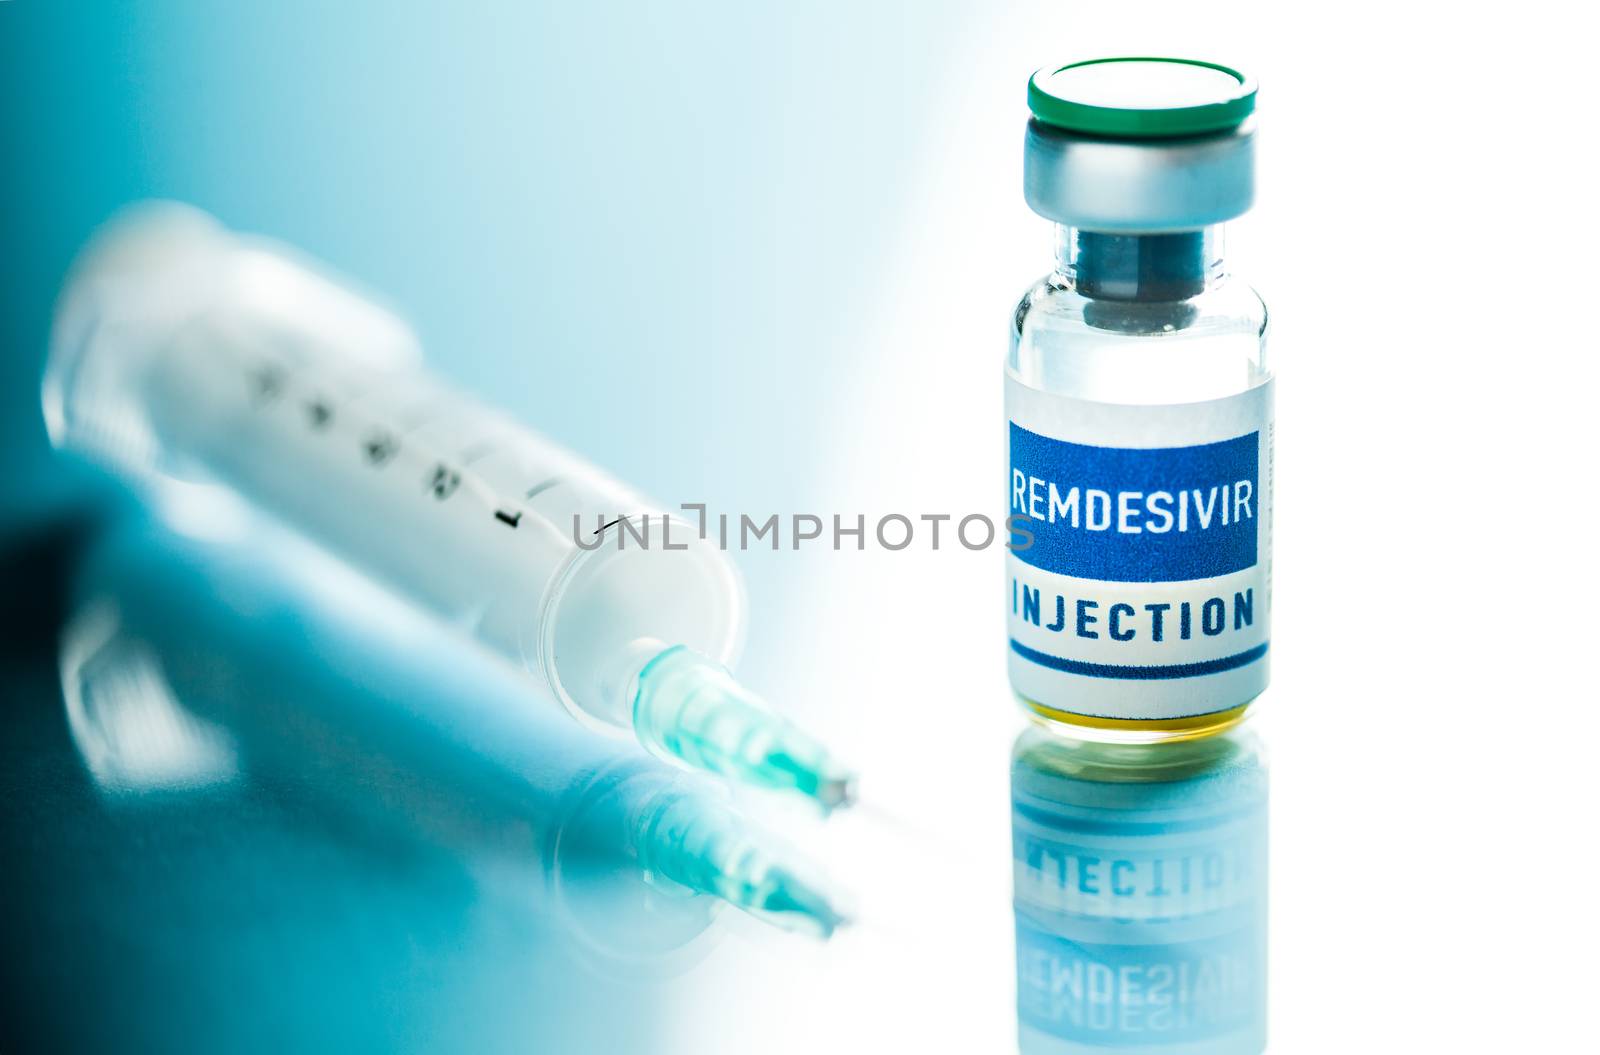 REMDESIVIR injection ampoule with syringe & needle,isolated on reflective glass surface,potential FDA experimental trial drug for treating Coronavirus COVID-19 virus disease cases,pandemic crisis cure